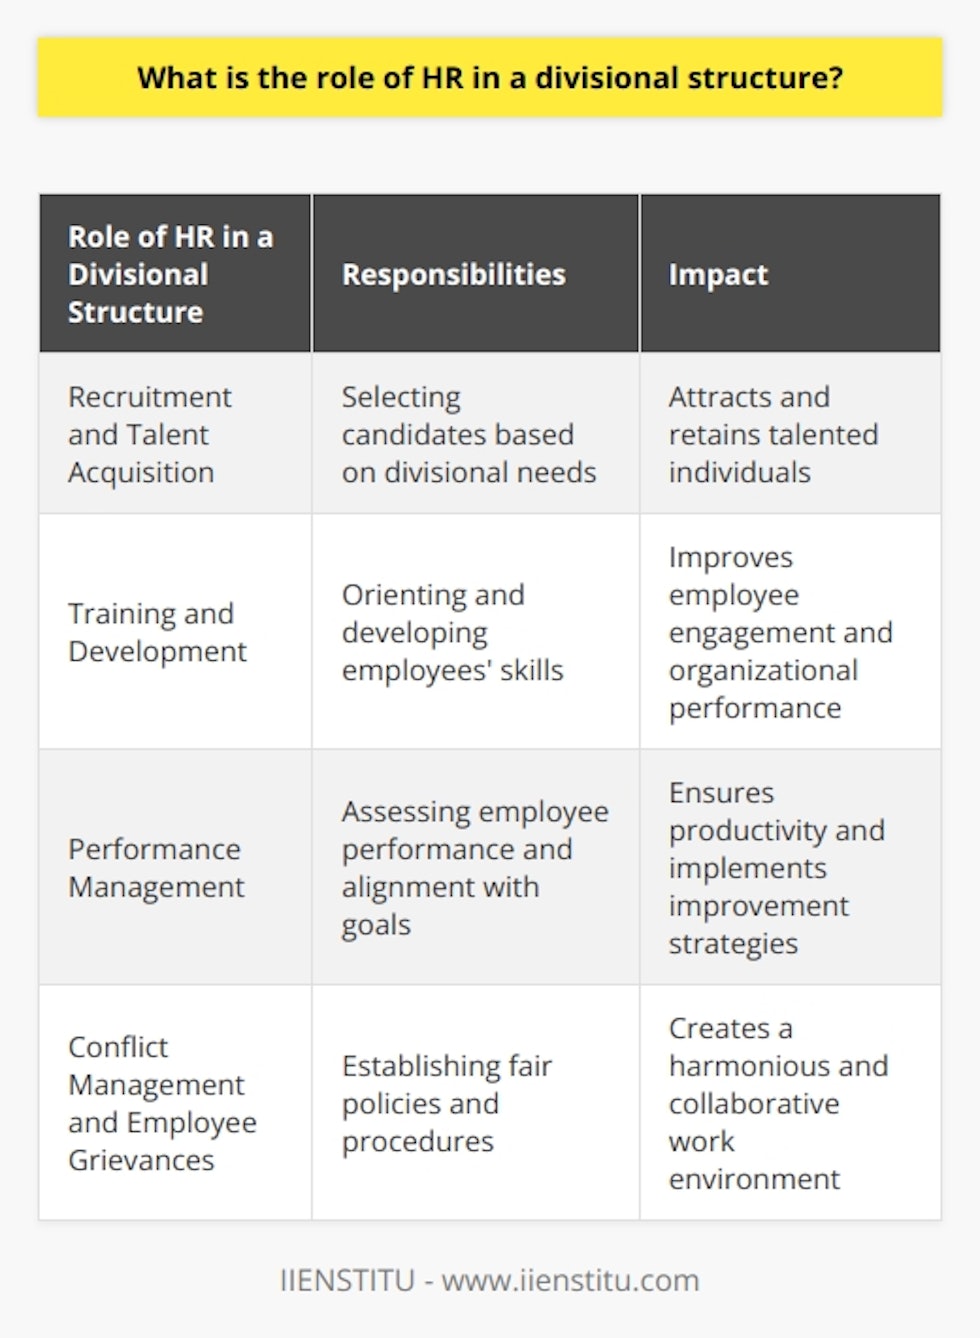 The role of HR in a divisional structure is crucial as it assists in the smooth operation of an organization. A divisional structure divides the company into separate divisions, each with its functional departments, such as marketing, finance, and human resources. HR's main responsibility is to manage employee relations, ensuring that each division has the necessary human capital and skillset.Recruitment and talent acquisition is an important aspect of HR's role in a divisional structure. HR must have a solid understanding of each division's needs, which helps them select the right candidates for each division, ensuring that employees are well-suited to their respective roles. The HR department plays a vital role in attracting and retaining talented individuals to maintain a competitive advantage in the market.Training and development also fall under the purview of the HR department in a divisional structure. HR must ensure that employees have the necessary skills to perform their tasks effectively. This includes providing new employees with necessary orientation and training, as well as continuously developing the skillset of existing employees through training programs and workshops. This ongoing development serves to improve both employee engagement and overall organizational performance.Performance management is another area where HR plays a significant role in a divisional structure. HR is responsible for assessing employee performance and ensuring that their contributions align with the company's goals. By having clearly defined performance metrics, HR can effectively evaluate employee performance and implement strategies for improvement when needed. Regular feedback and open communication between HR and employees also foster a positive work culture.Managing conflicts and addressing employee grievances is another crucial responsibility of HR in a divisional structure. HR needs to establish appropriate policies and procedures to ensure that employees are treated fairly and consistently across all divisions. By effectively managing these issues, HR helps maintain a harmonious and collaborative work environment.In conclusion, HR plays a critical role in a divisional structure, ensuring the effective management of human capital resources. The HR department contributes by recruiting and retaining talent, developing employee skills, evaluating performance, and addressing conflicts. These functions enable HR to support the company's strategic objectives and drive enhanced organizational performance.